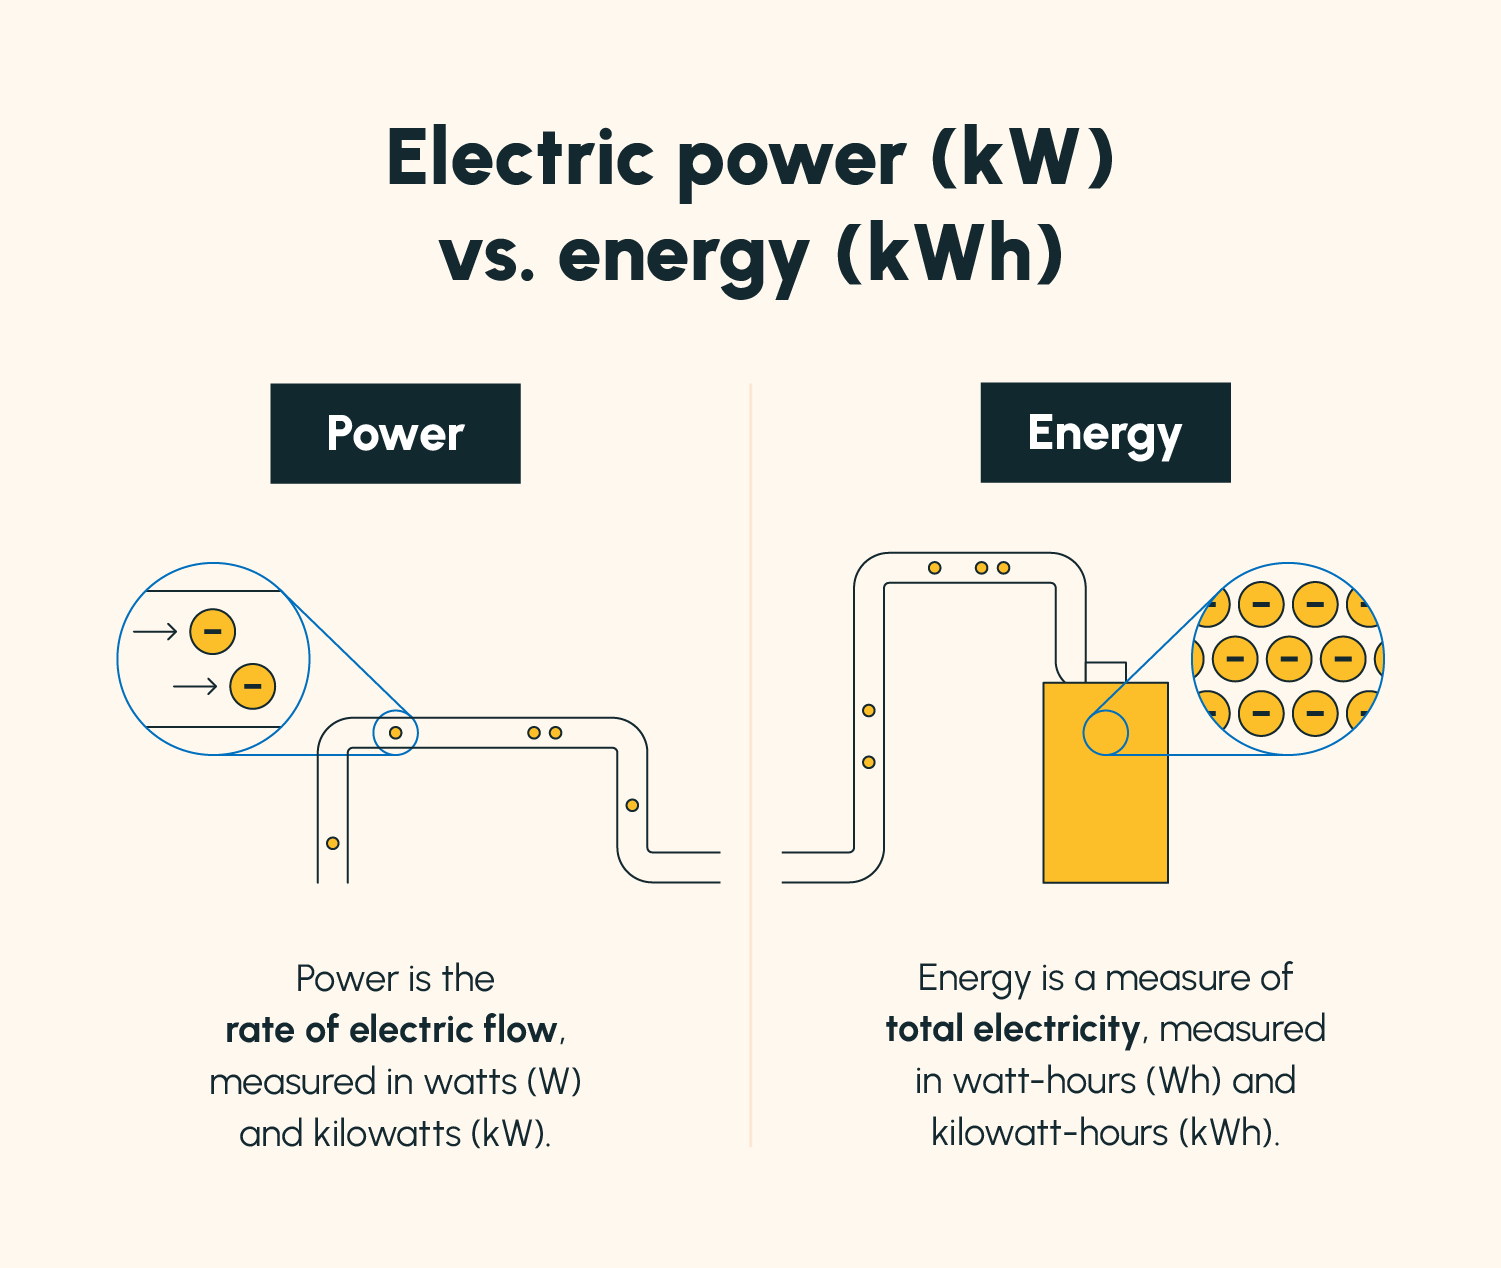 An illustrated side-by-side comparison of electric power and electric energy